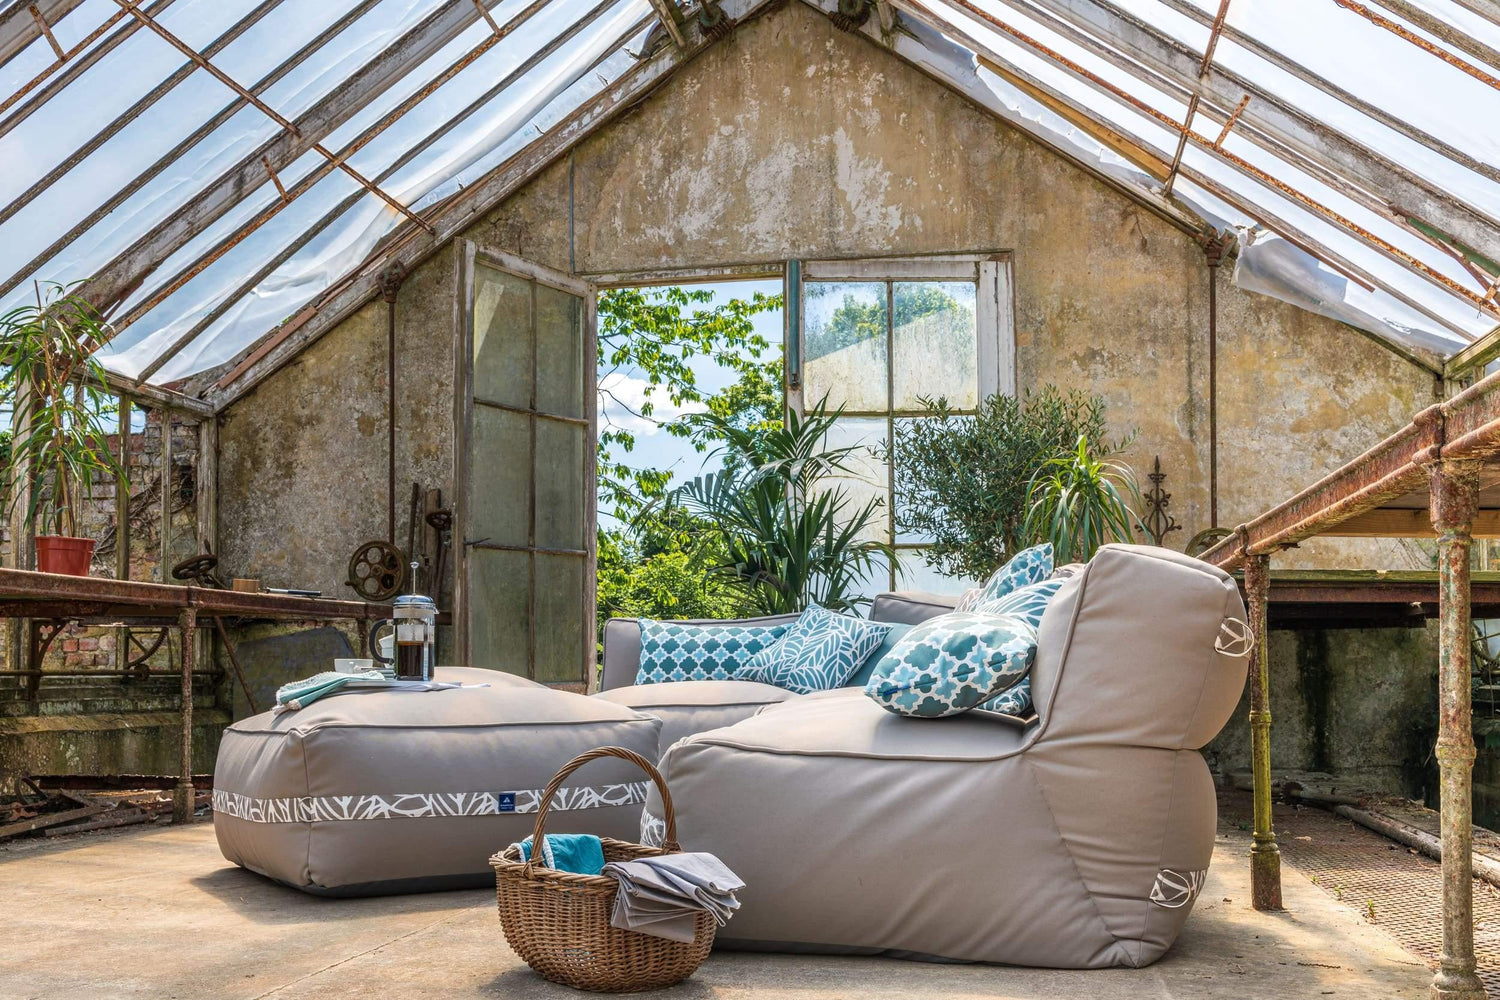 What’s in, out – 2020 garden trends, are beanbag chairs and furniture the way? - armadillosun